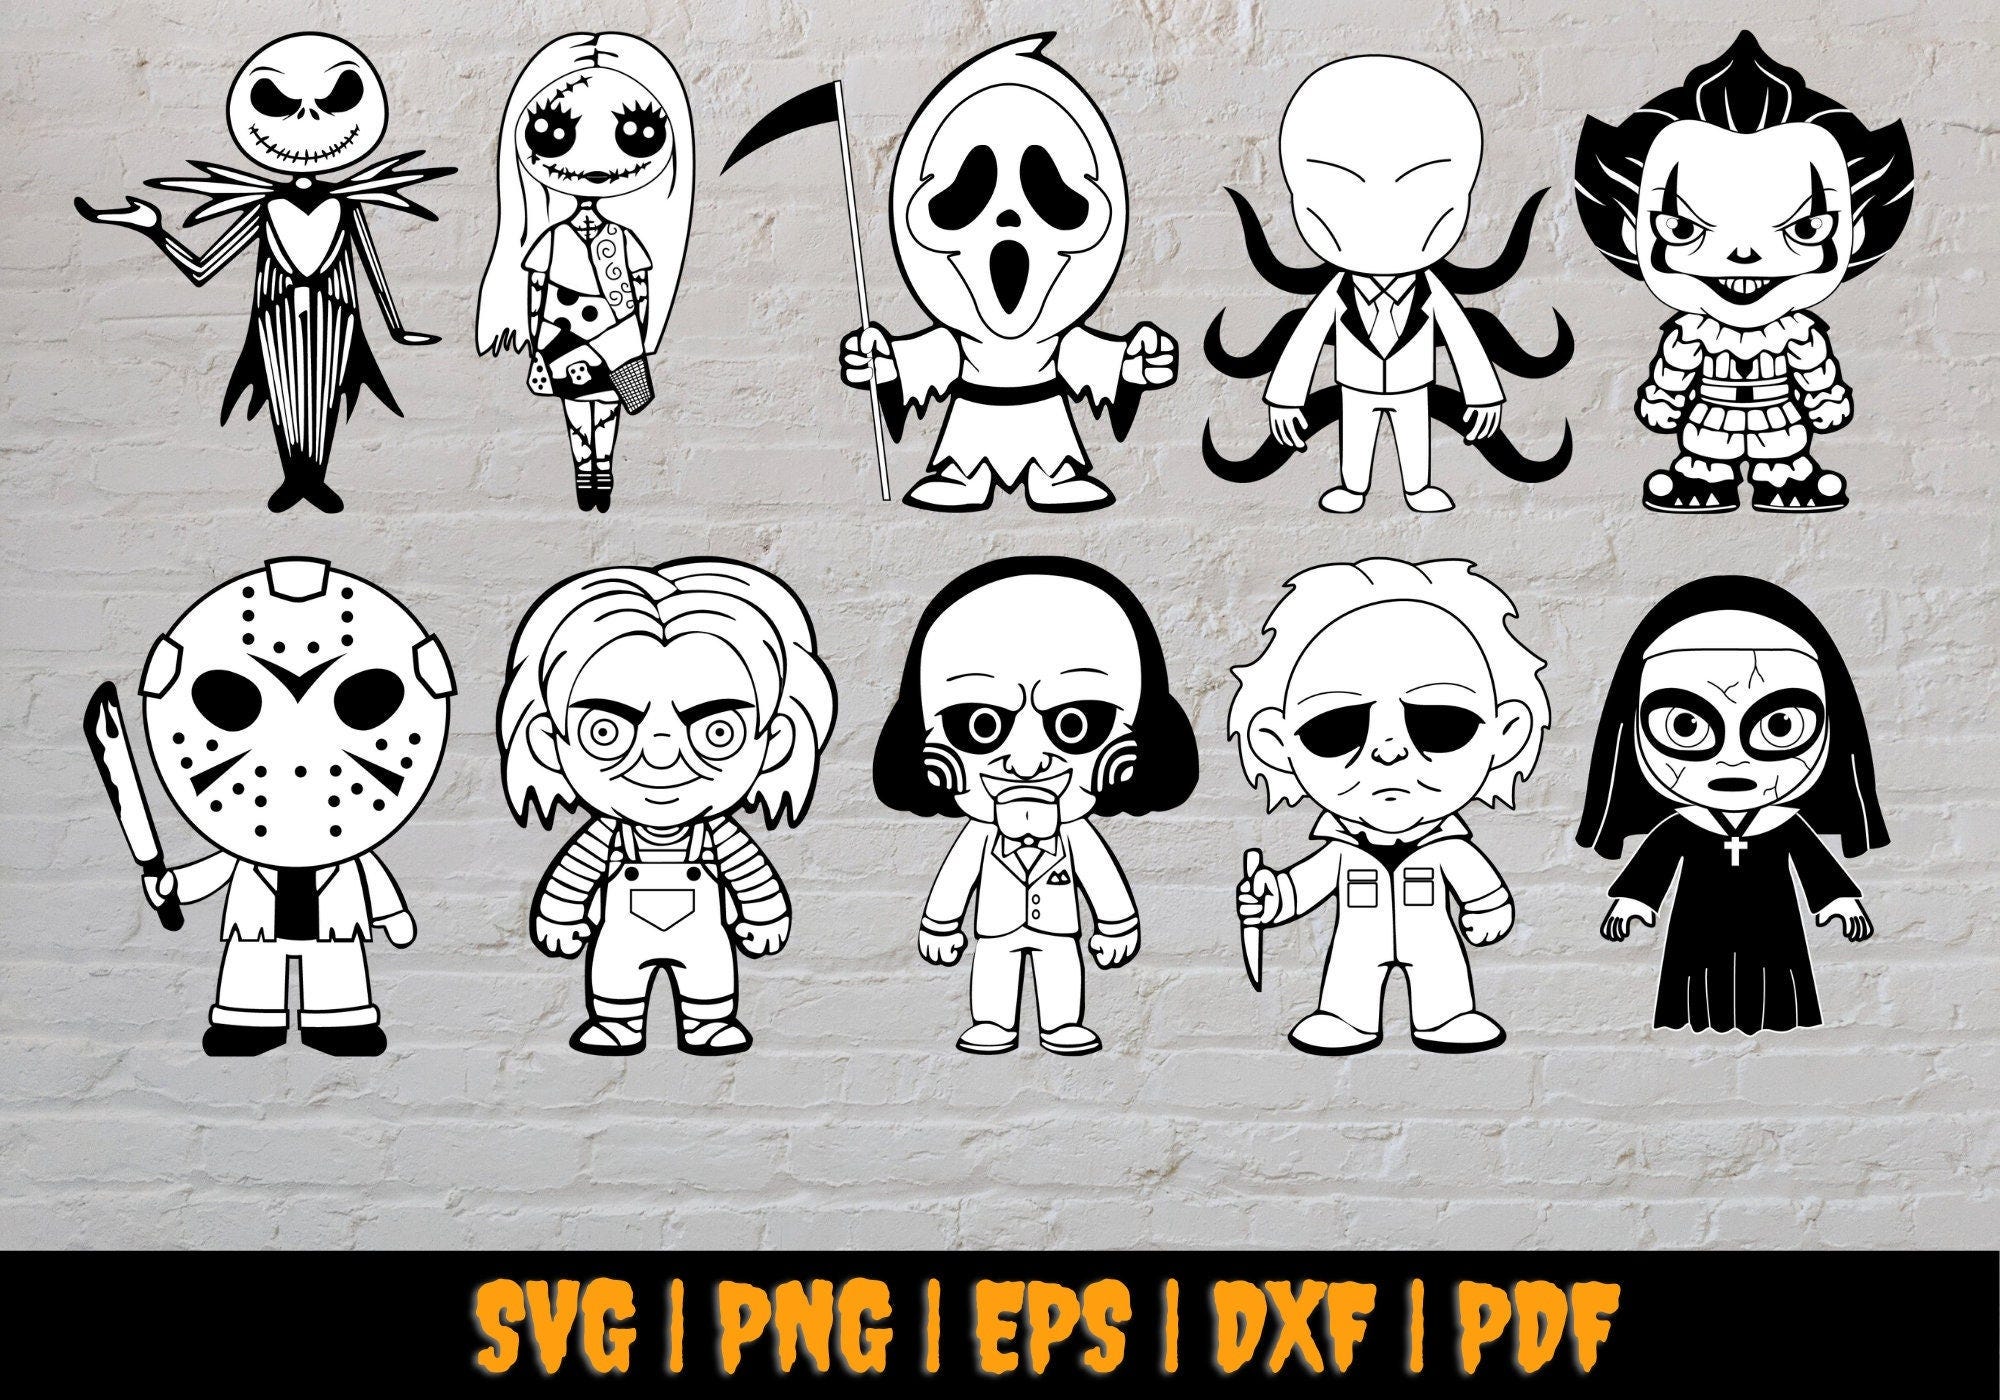 Halloween Character Svg, Nightmare Before Christmas Svg, Jack and Sally Svg, Pennywise Svg, Mike Svg, Jason Svg, Jigsaw Svg, , Chucky Svg